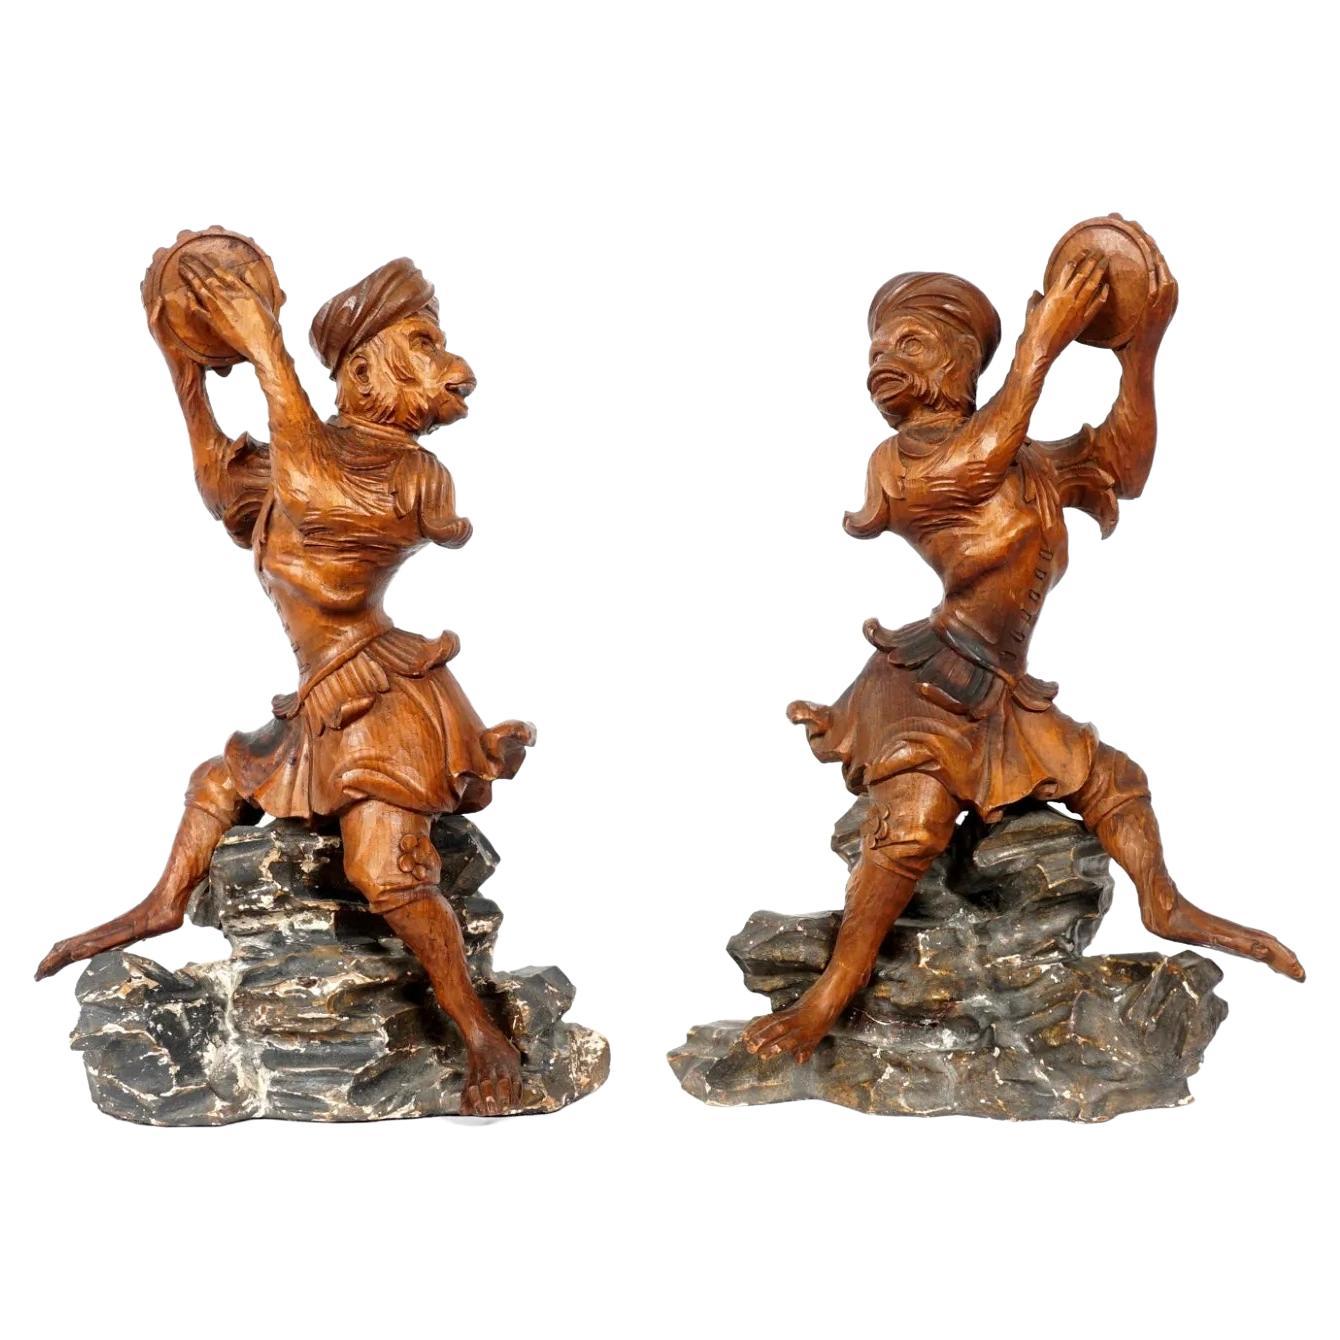 Pair of Continental Carved Wood Monkeys with Tambourine